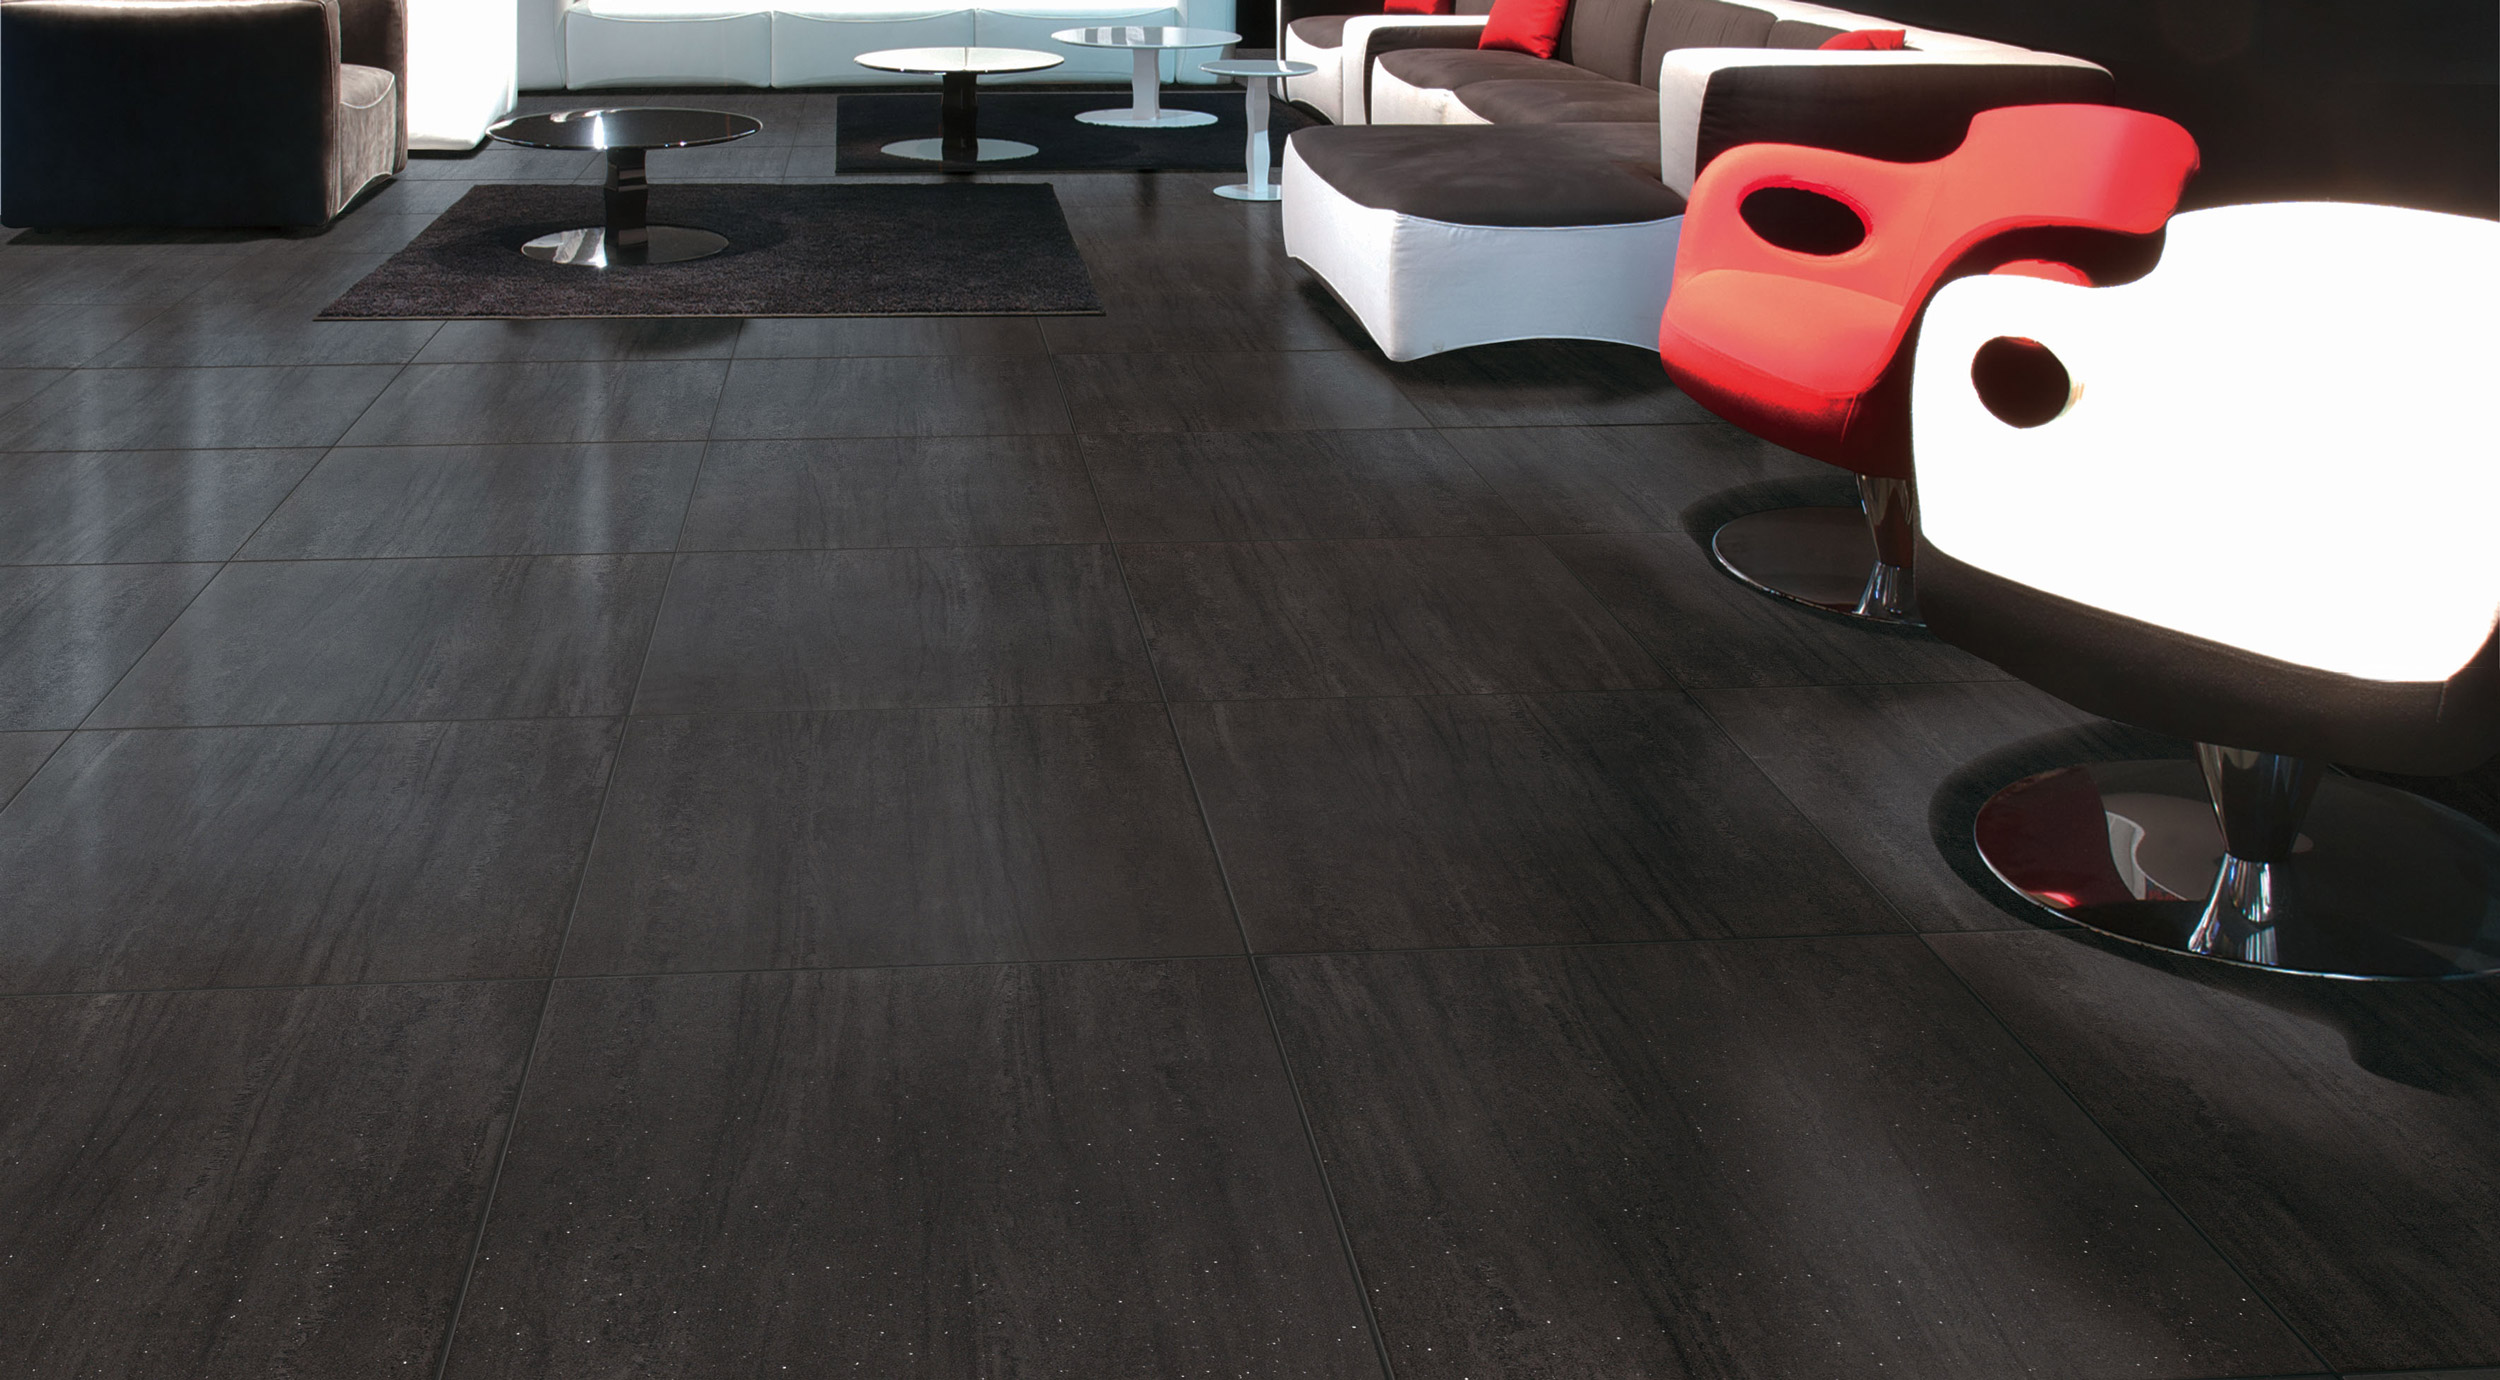 Carrelage noir Contract by Ceramica Rondine